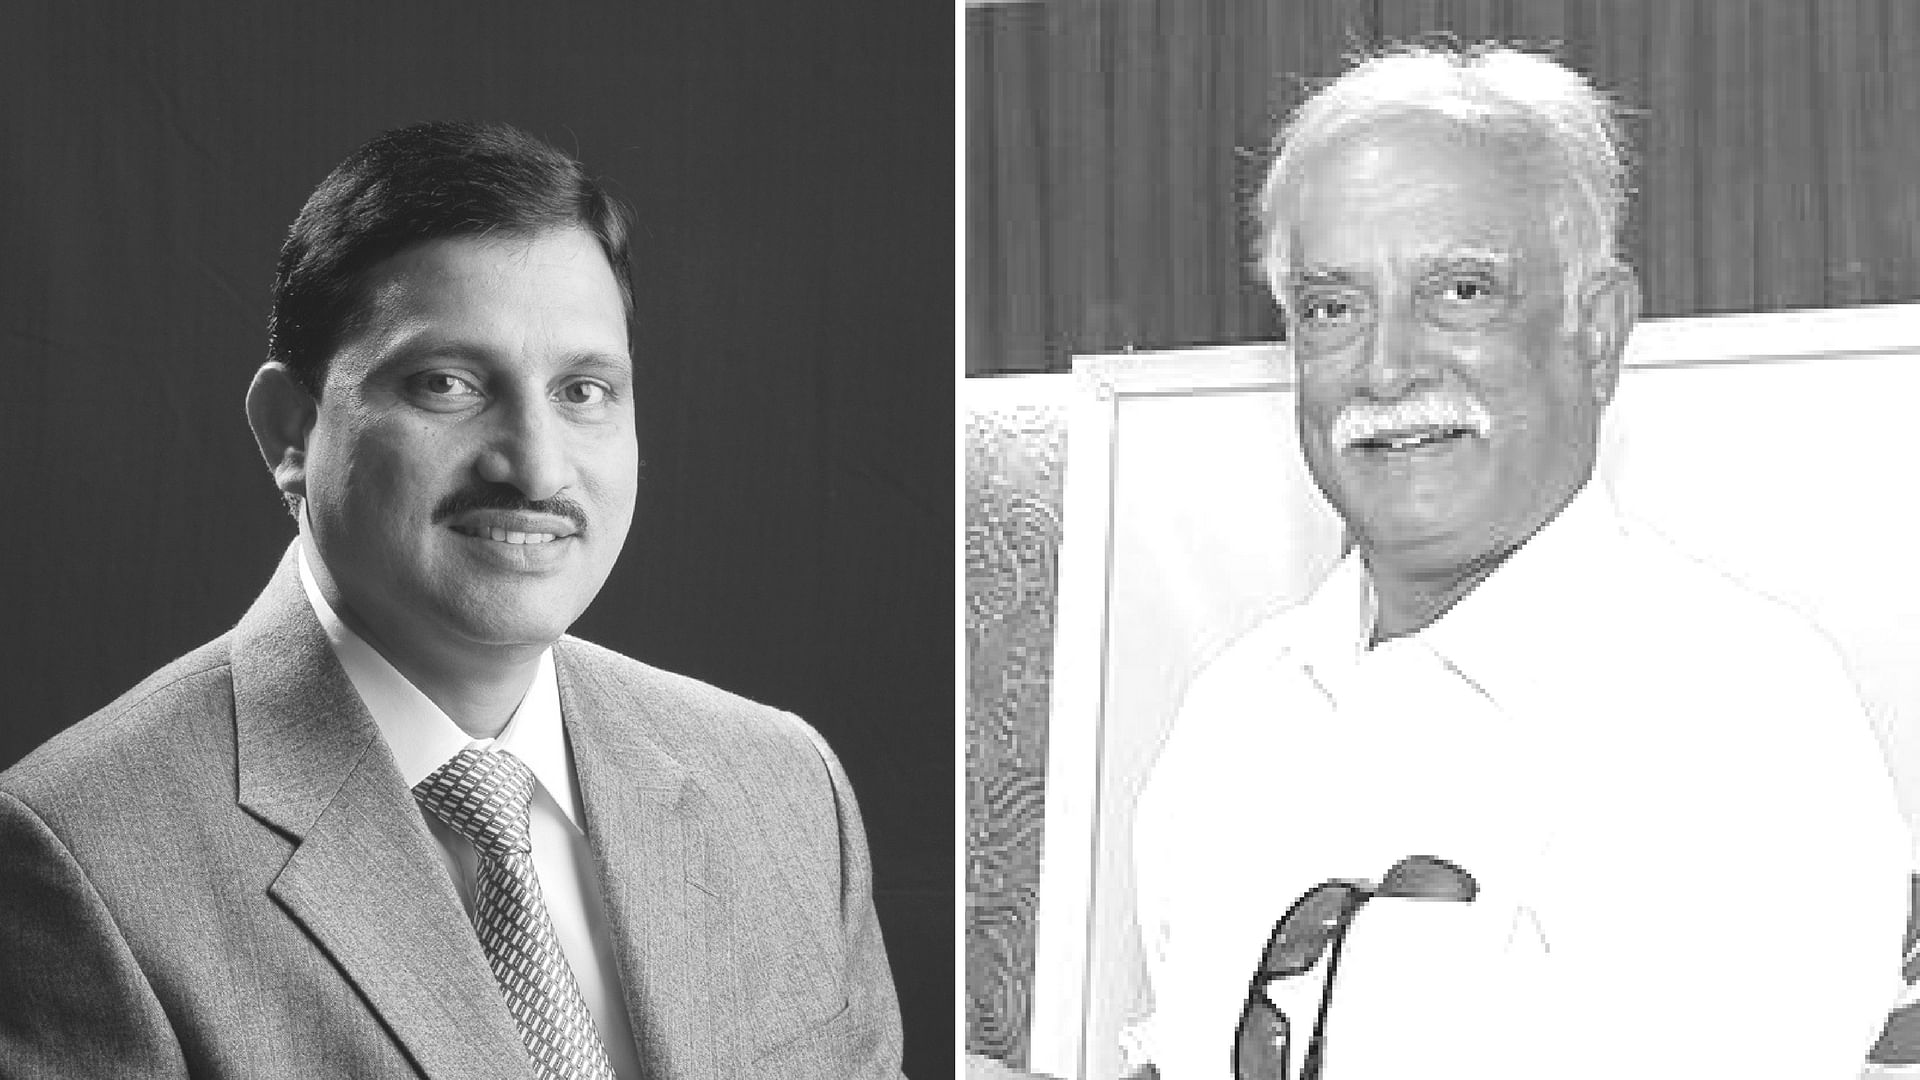 Civil Aviation Minister Ashok Gajapathi Raju and Minister of State for Science and Technology YS Chowdary.